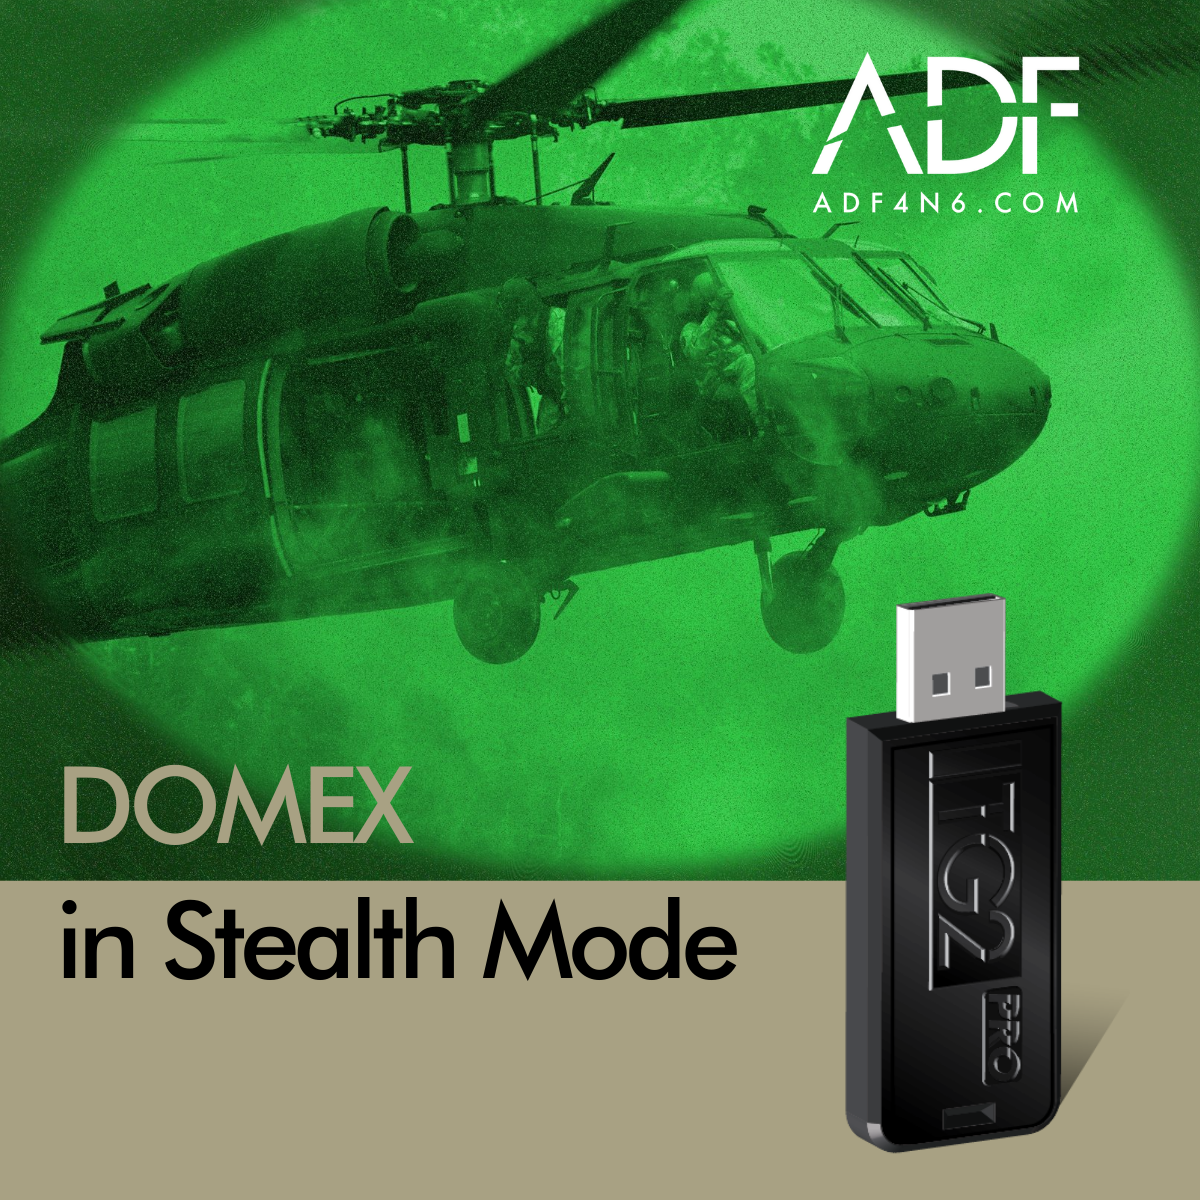 Triage-G2 PRO with blackhawk helicopter in background for DOMEX in stealth mode for sensitive site exploitation